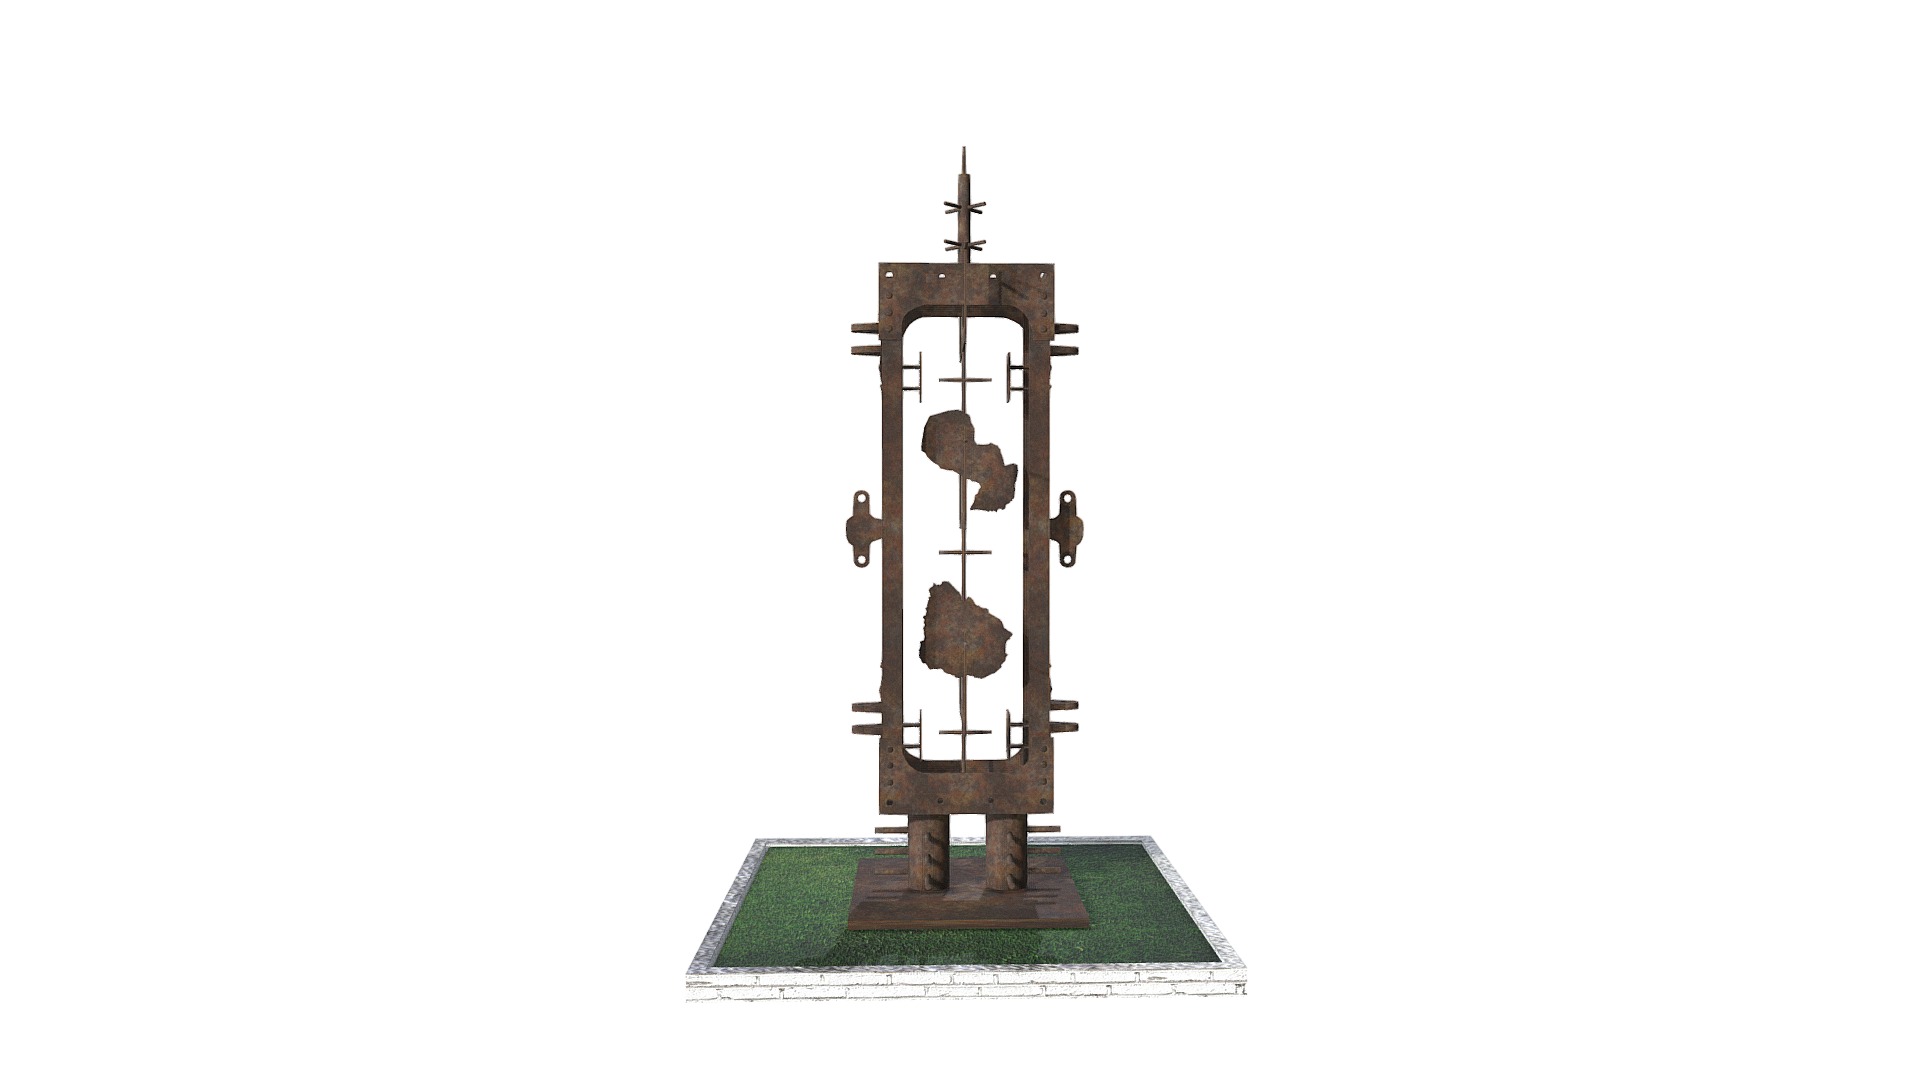 3D model La Tuna - This is a 3D model of the La Tuna. The 3D model is about a wooden cross on a green surface.